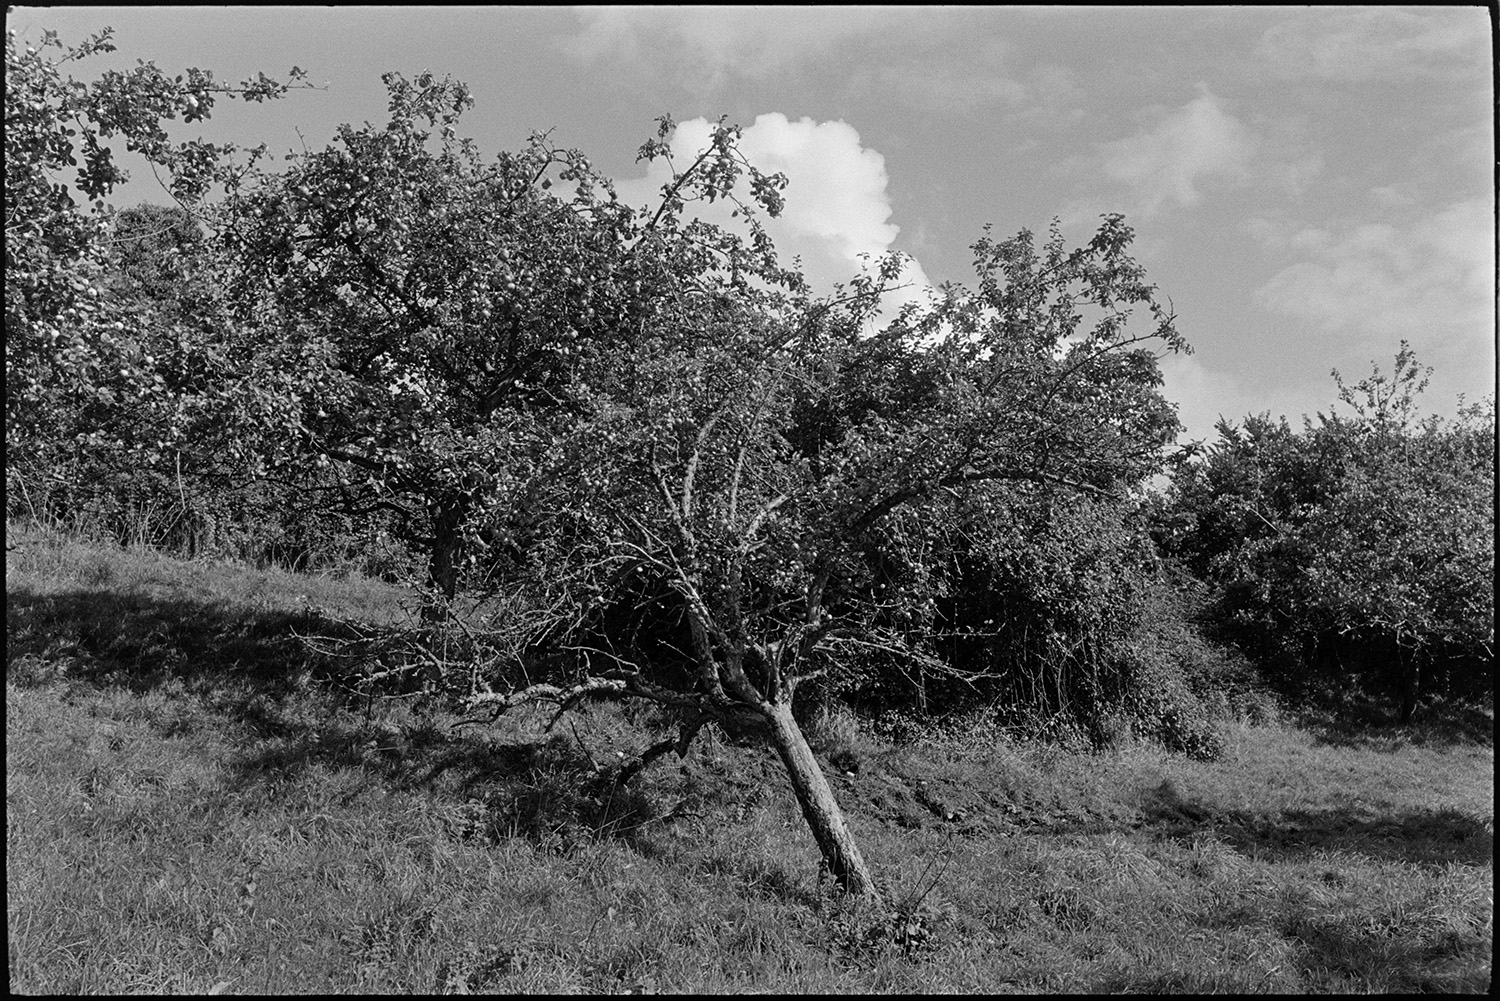 Cider orchard, clouds. 
[Apple trees in a cider orchard. Clouds are visible in the sky above.]